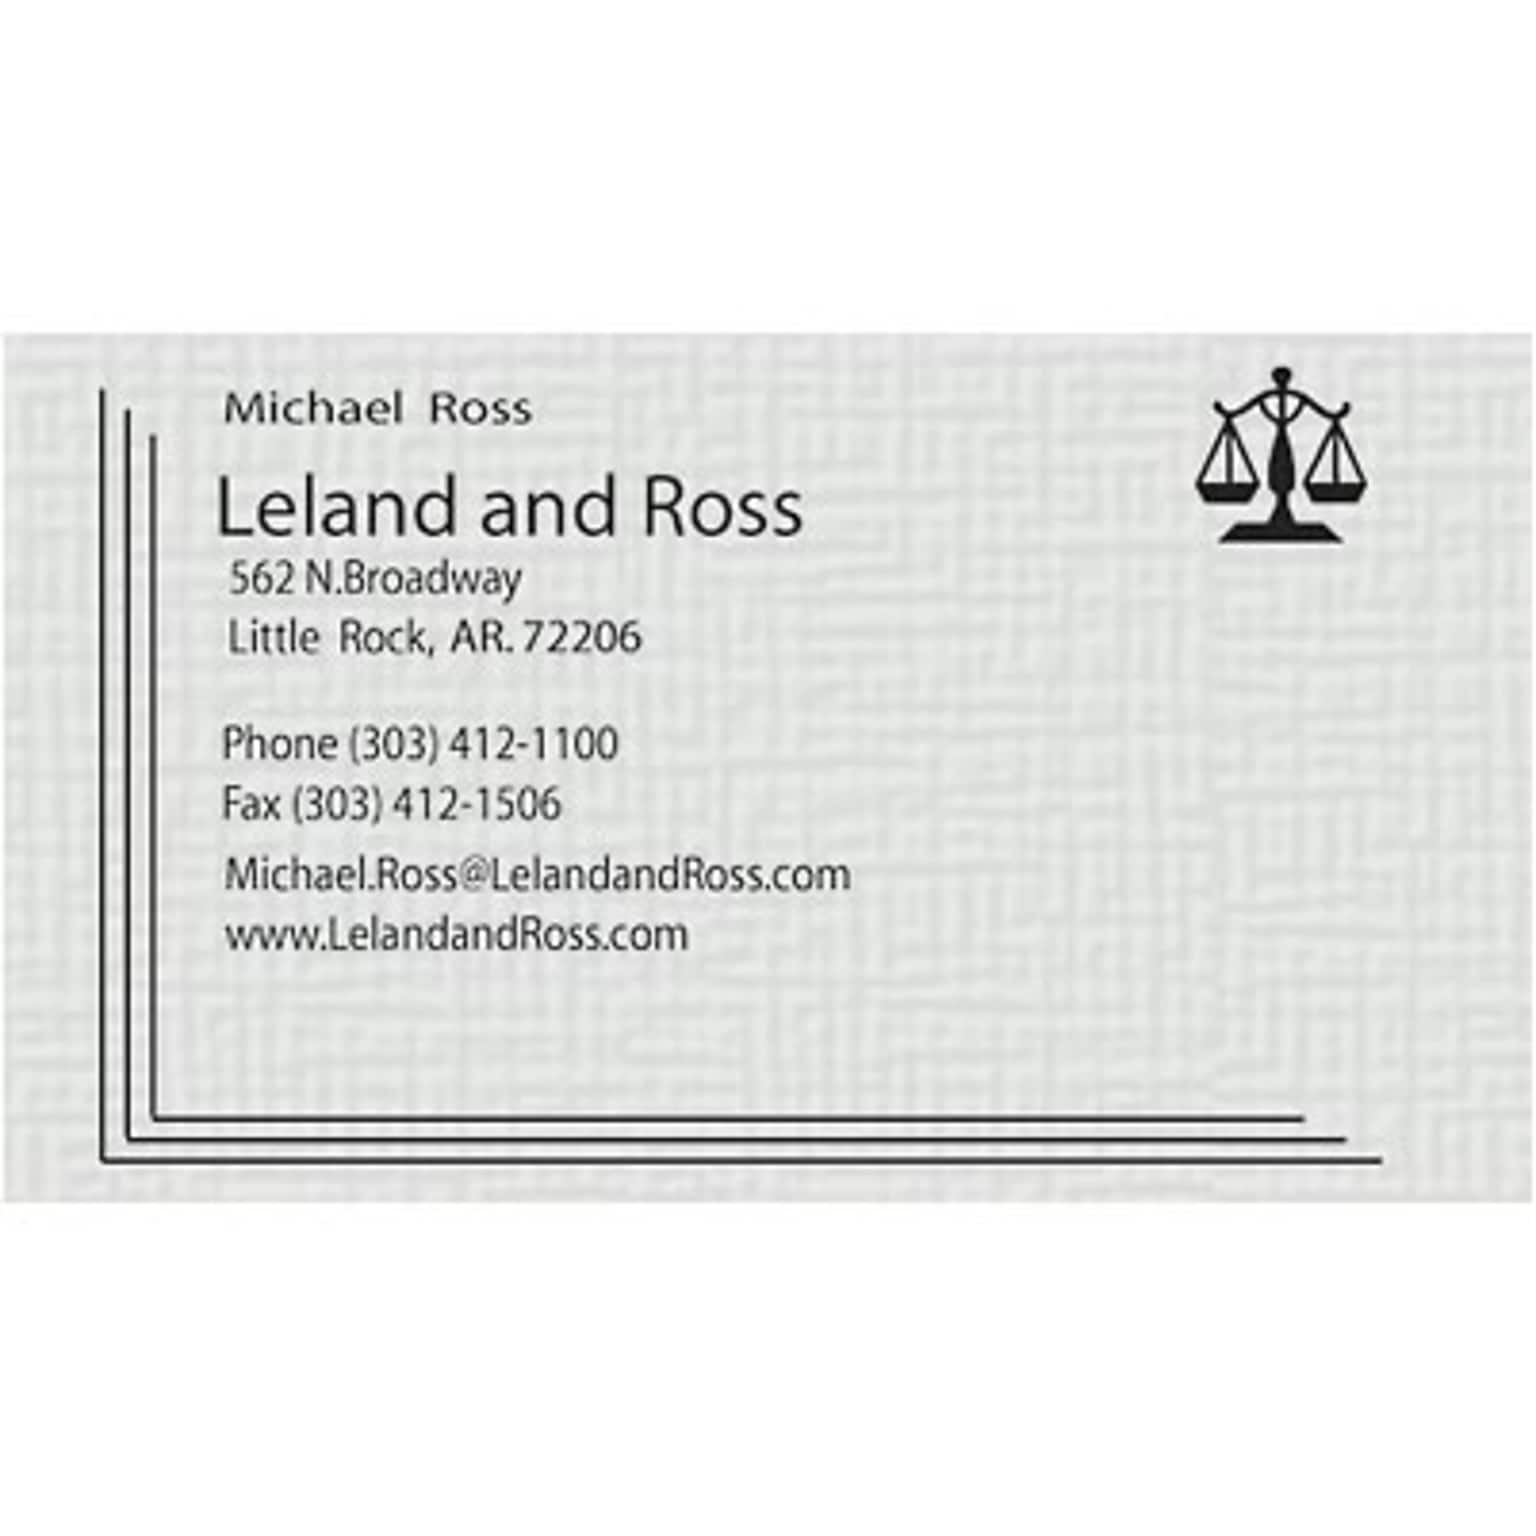 Custom 1-2 Color Business Cards, CLASSIC CREST® Smooth Antique Gray 80#, Raised Print, 1 Custom Ink, 2-Sided, 250/PK